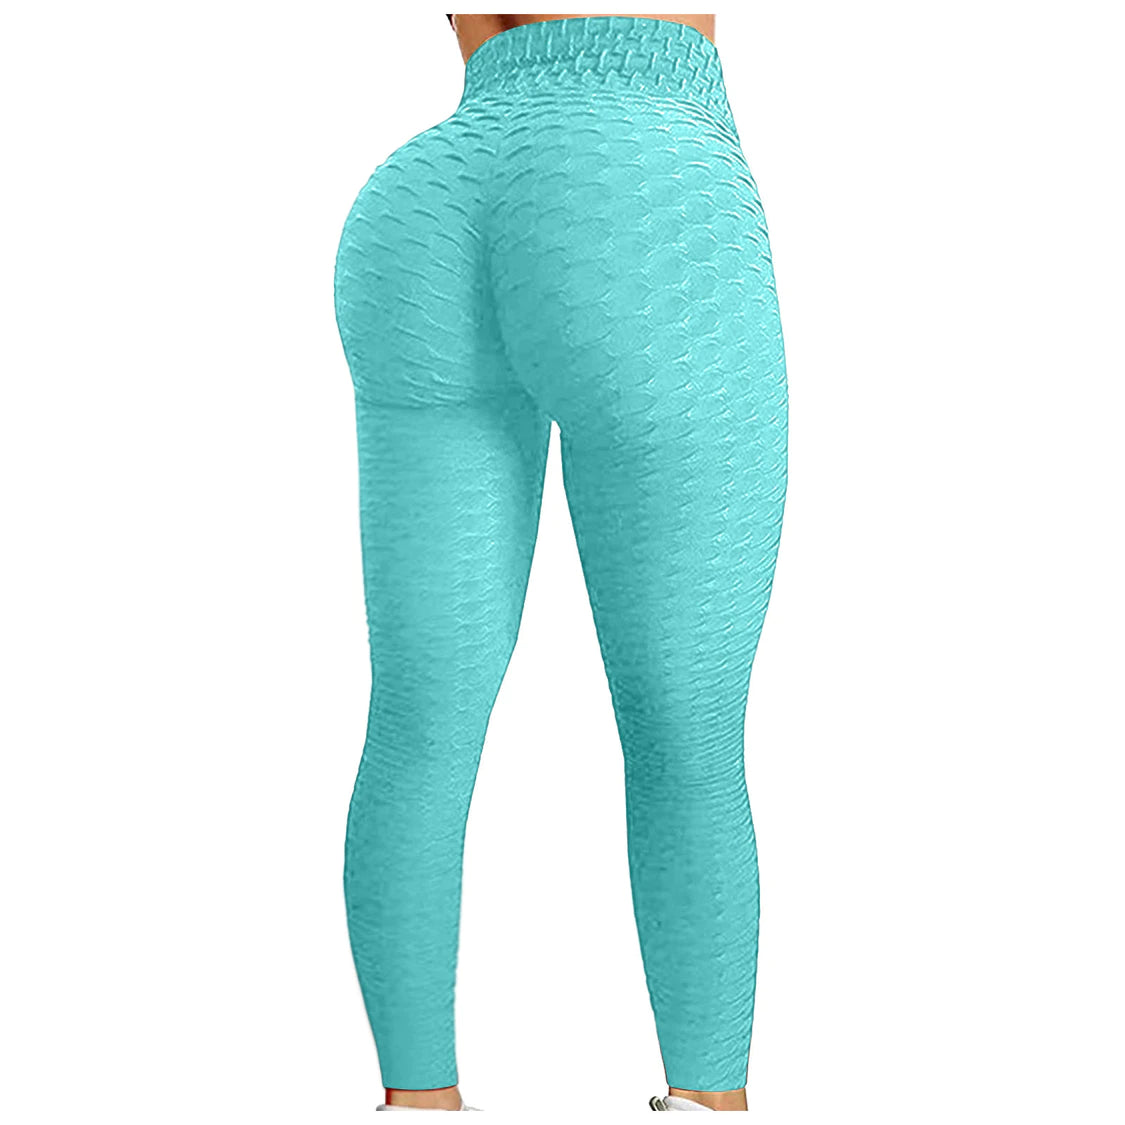 Athletic quick-dry fitness casual yoga hip-lifting bubble pants